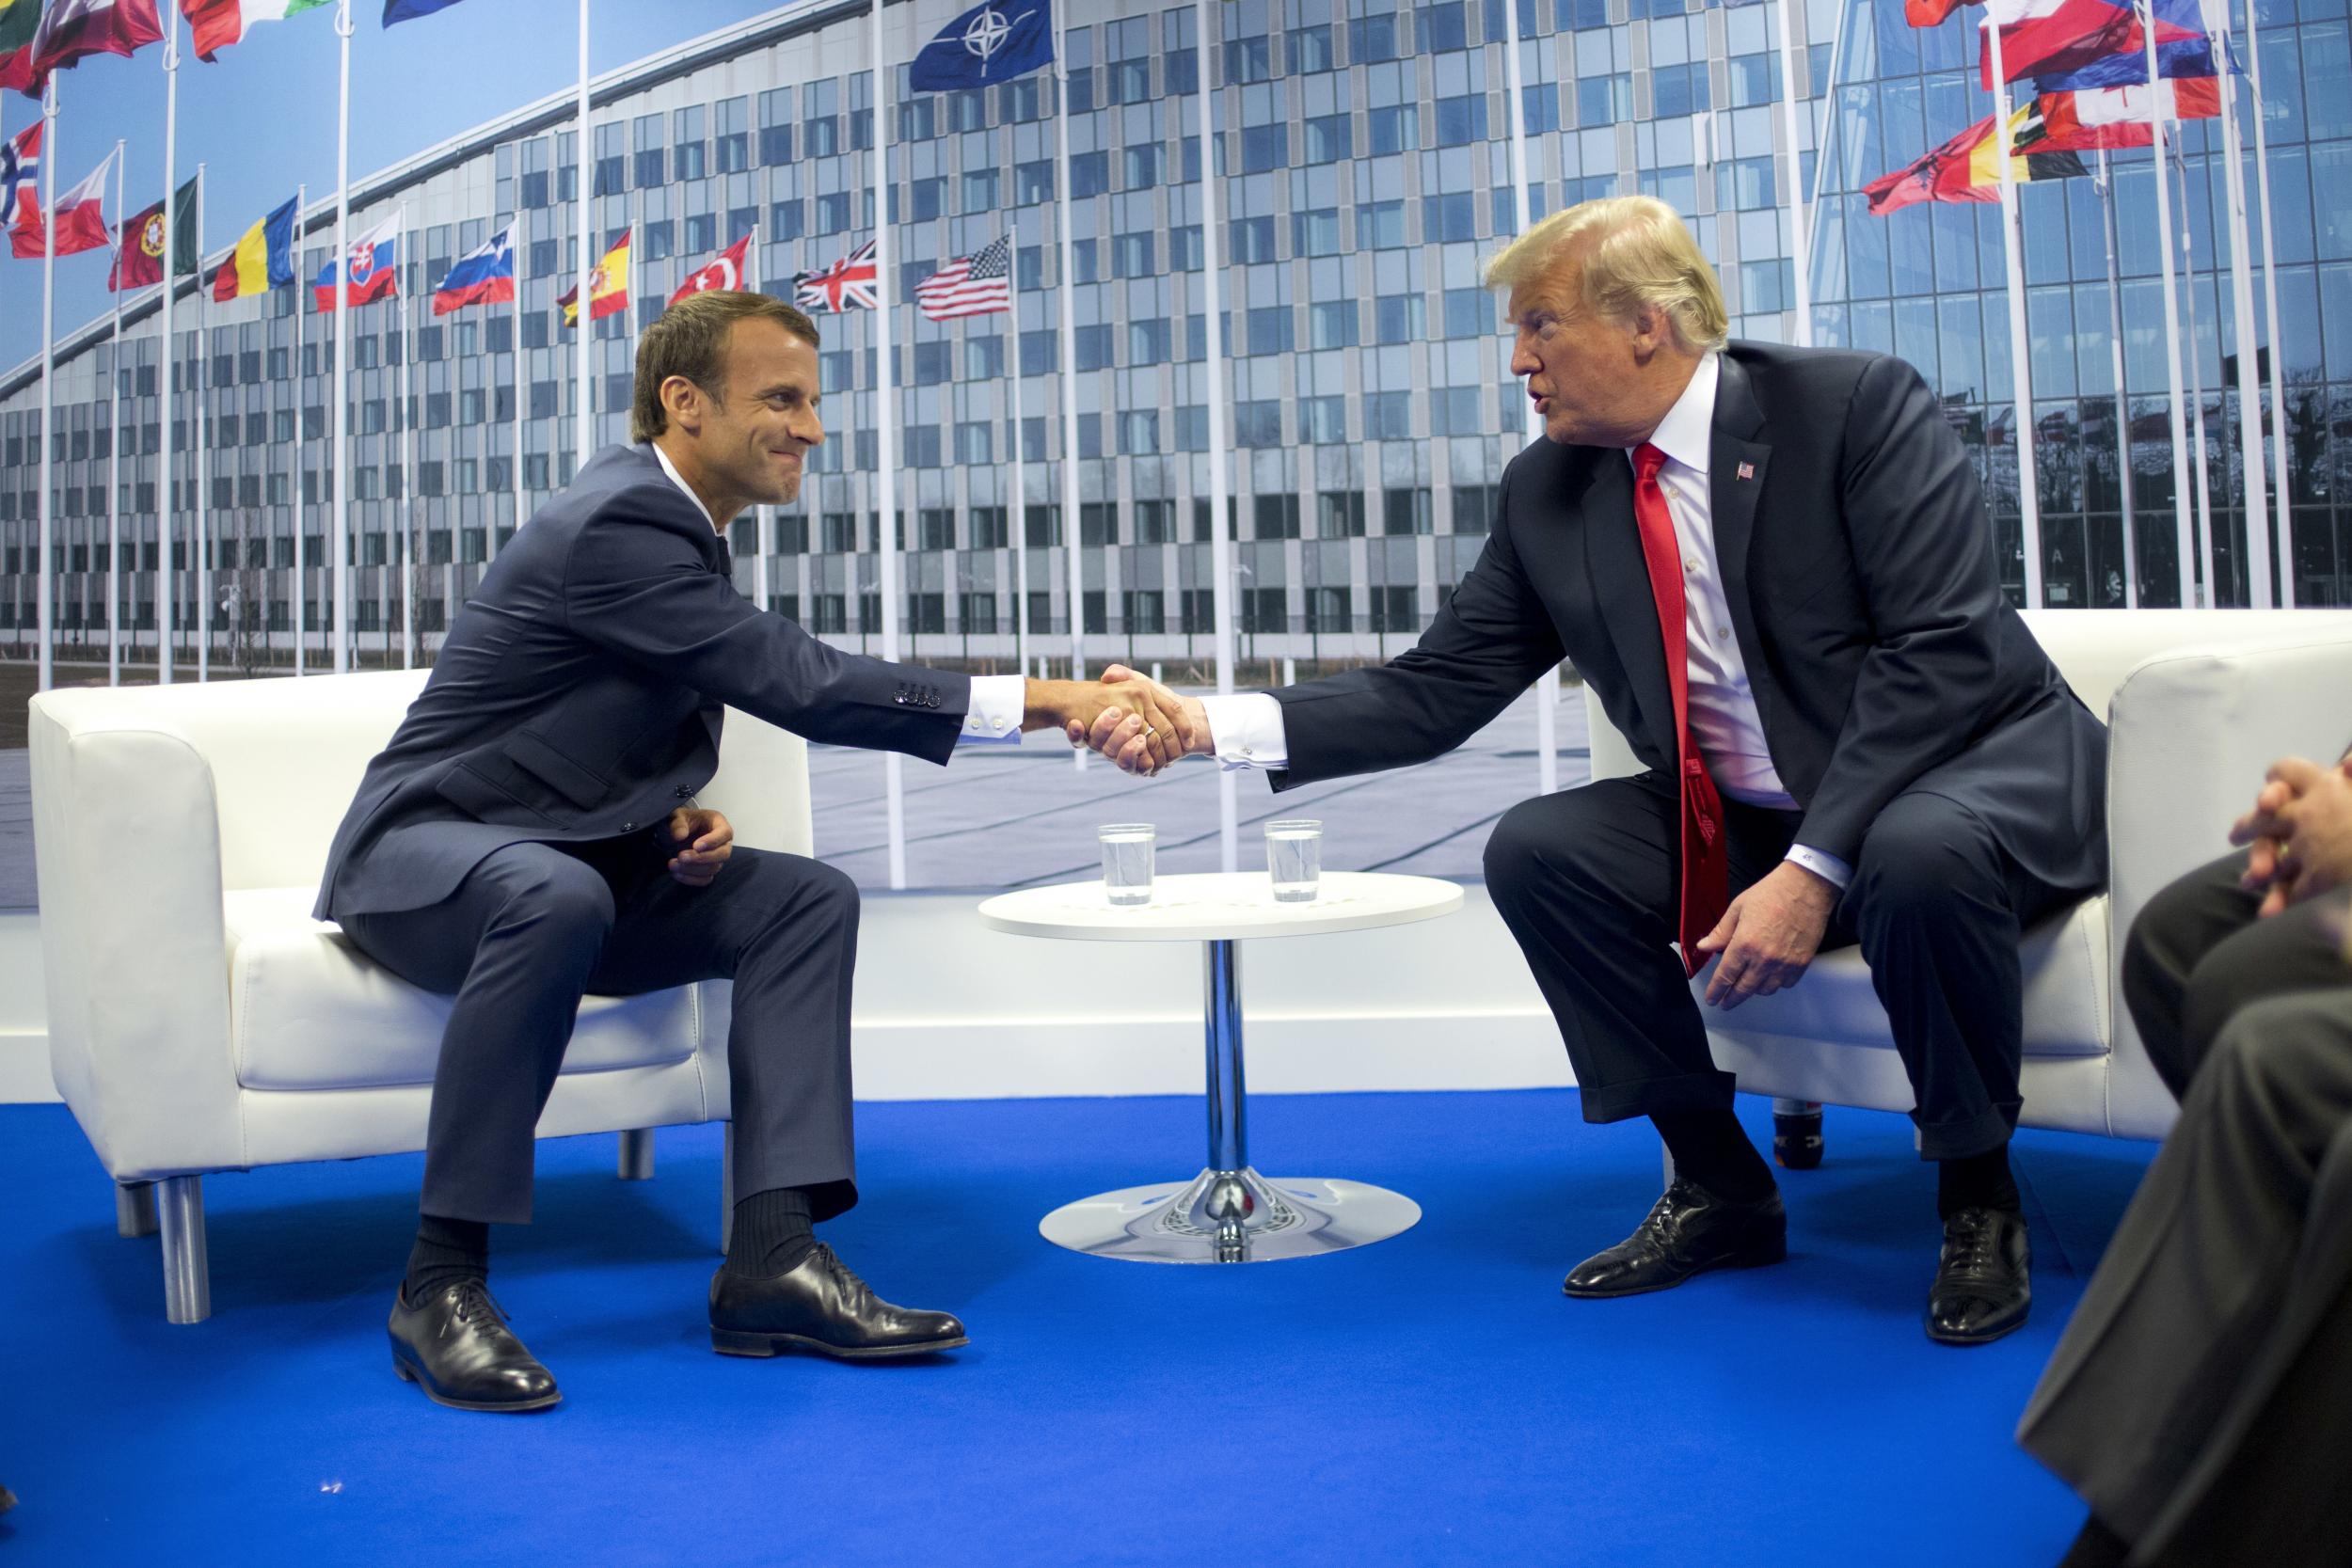 President Donald Trump and French President Emmanuel Macron shake hands during their bilateral meeting